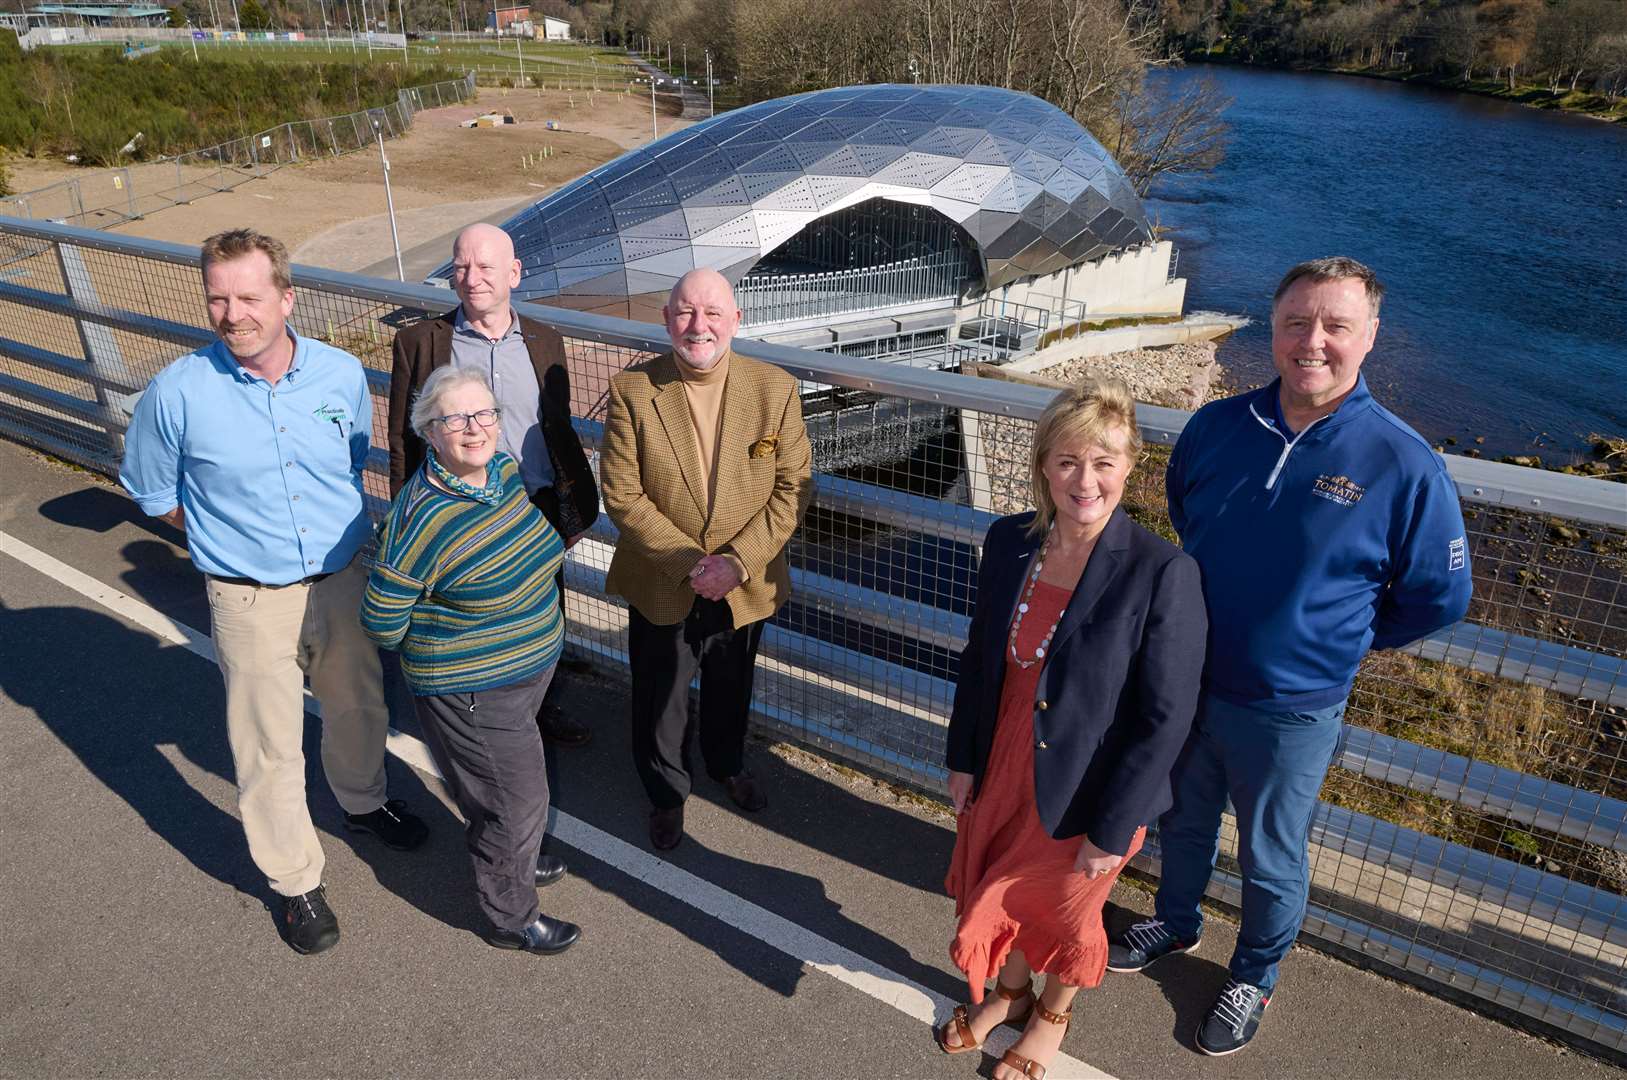 From left, some members of the new Climate Positive Leadership Group: Archie Prentice, Jane Cumming, George Baxter, Willie Cameron, Yvonne Crook, and Peter Kane.